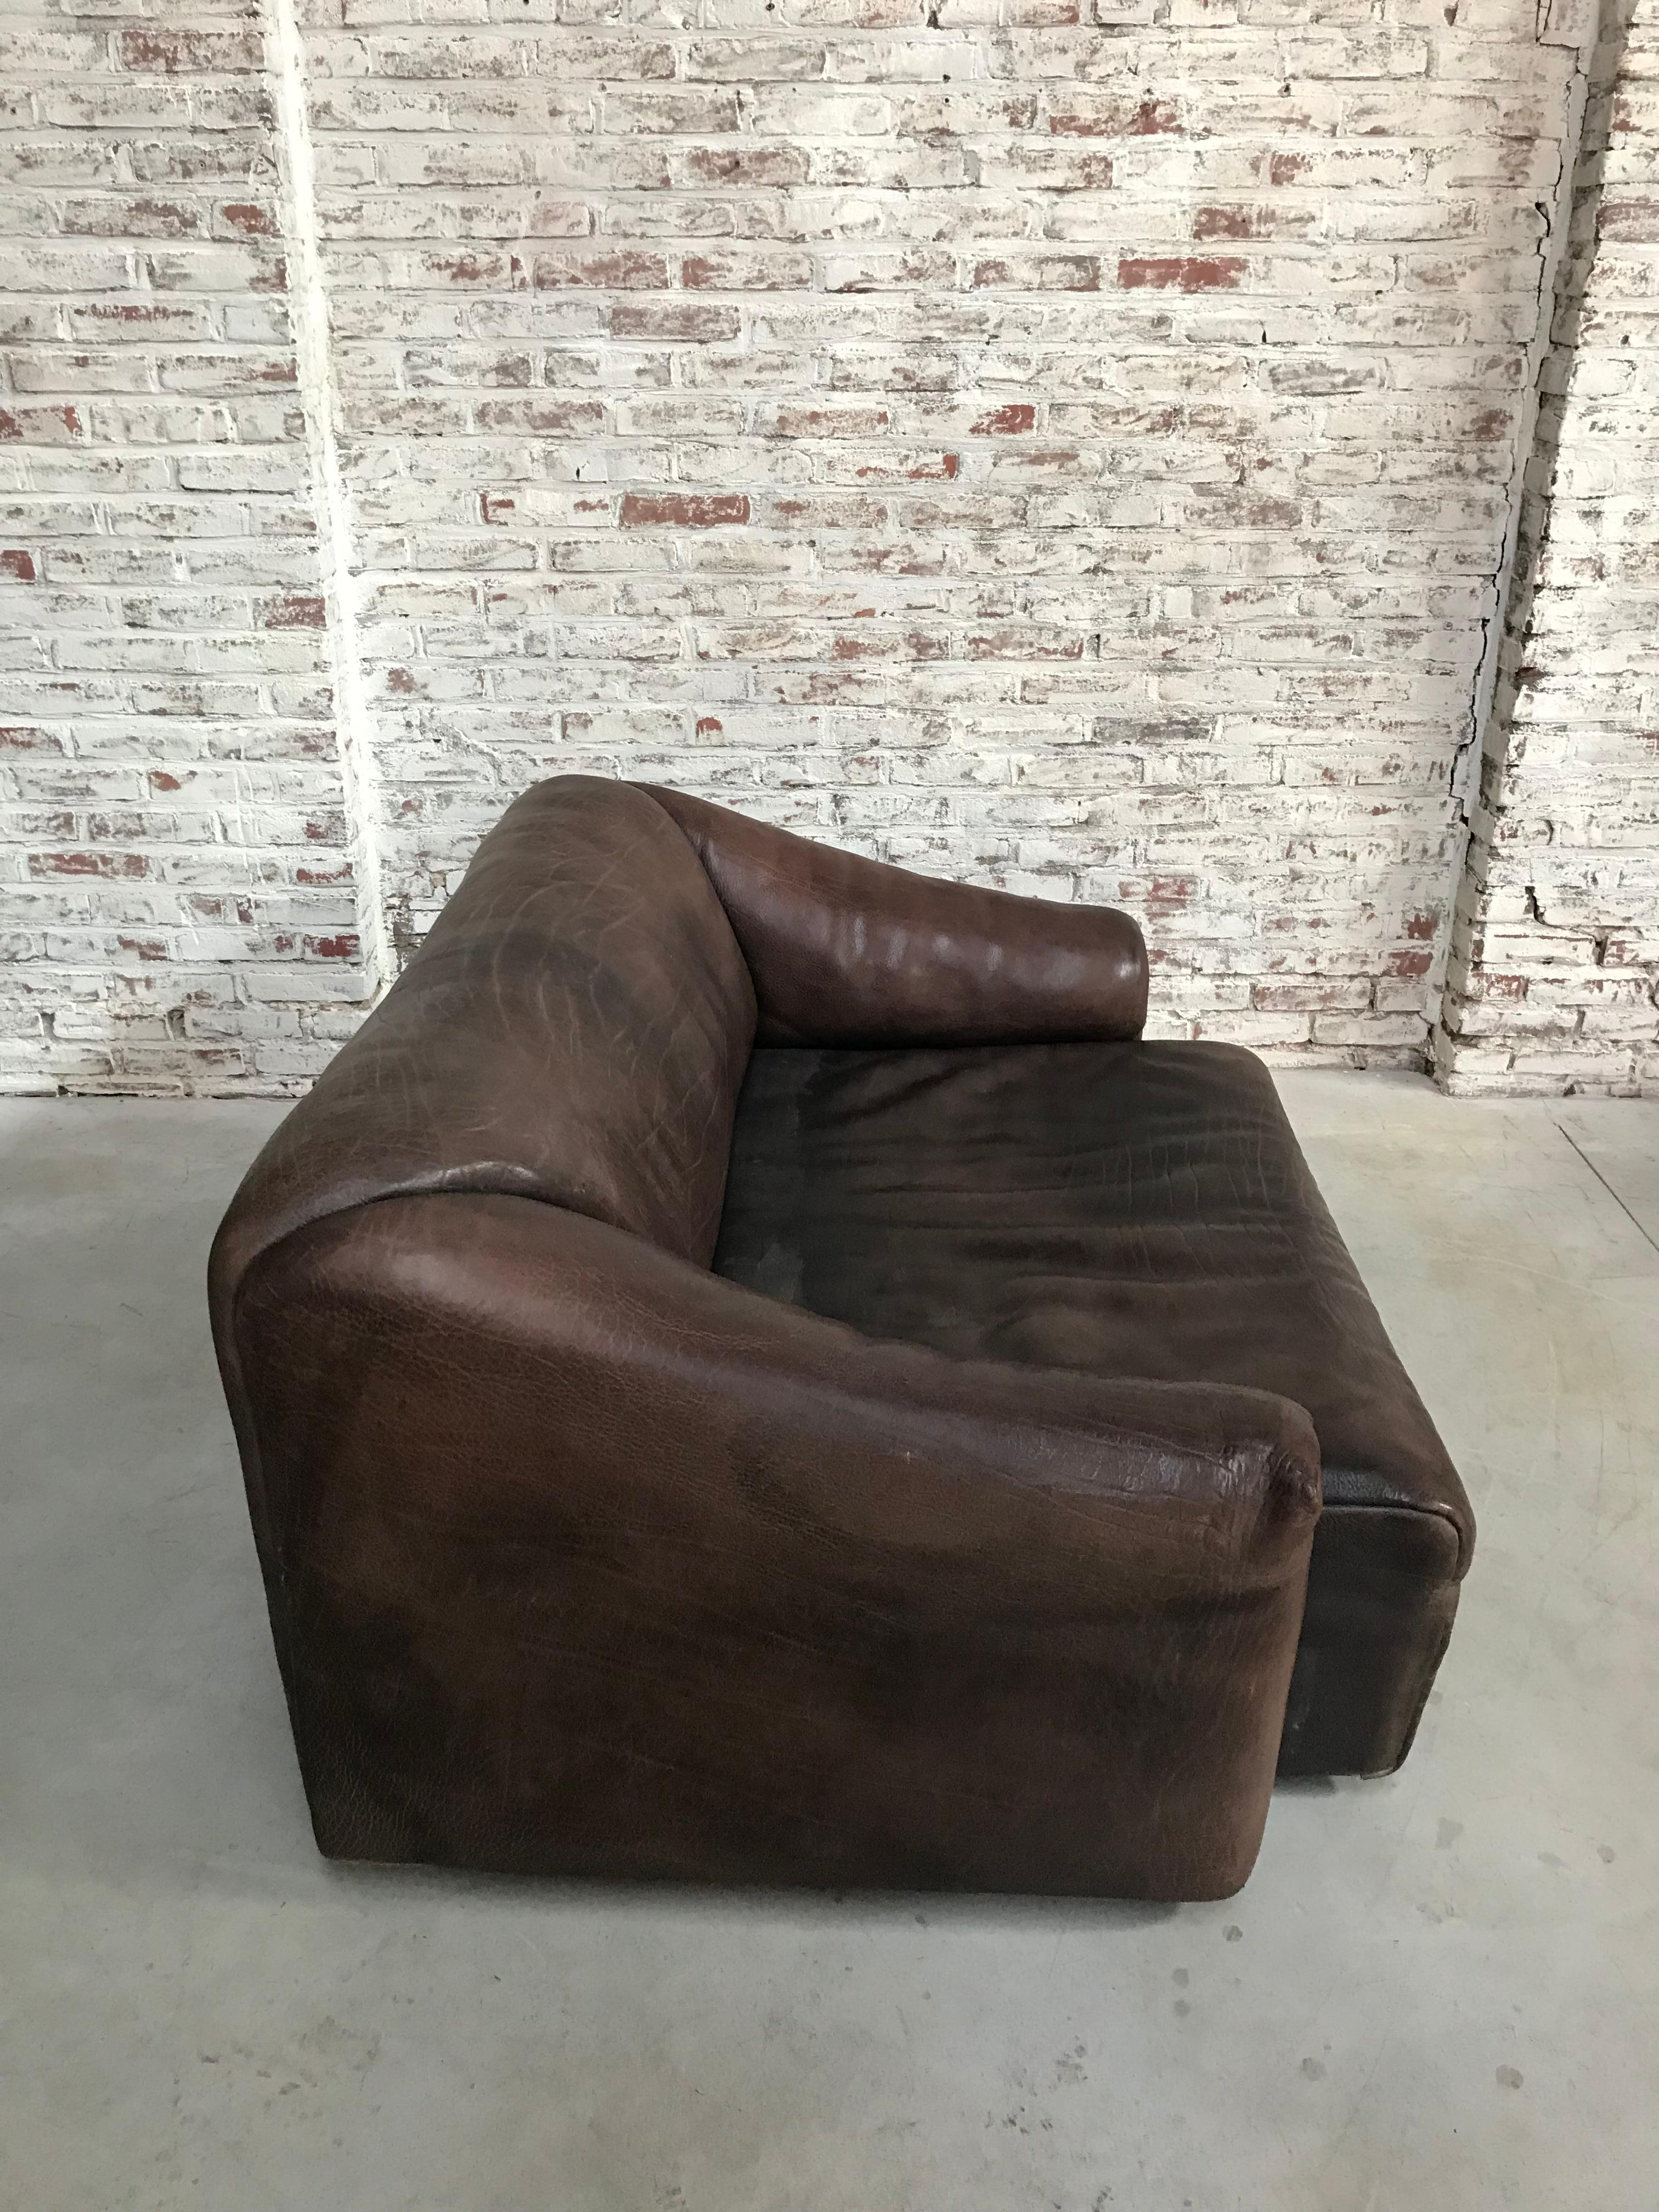 This is the Ds-47 sofa in 5 mm neck leather. The leather is laid on in one piece, from the outside and working inward. Pure craftmanship. Designed by the Swiss Desede-team in the 1970s. One of the first loungesofa's. The seating part can easily be